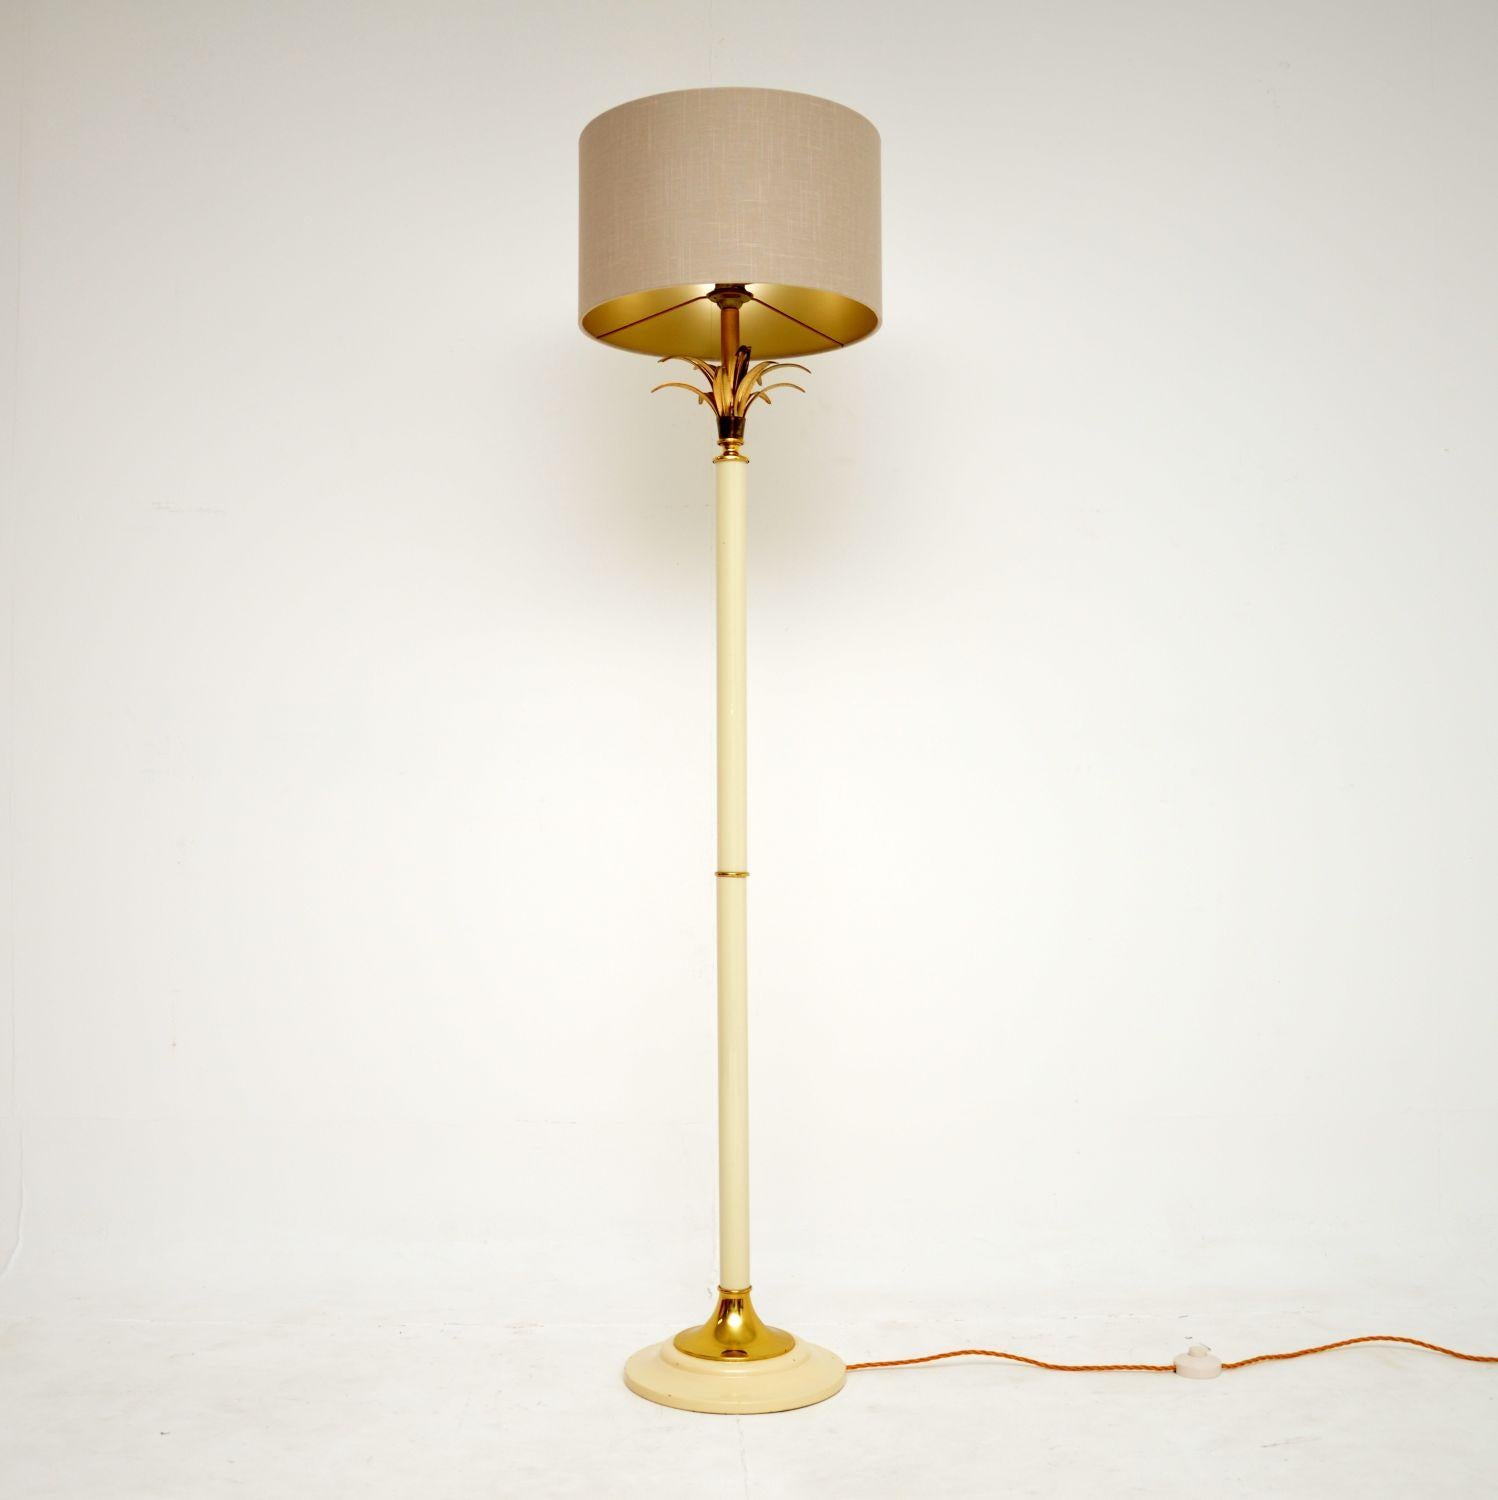 A very stylish cream enamel and brass floor lamp. This was made in France, it dates from the 1970’s.

It is of lovely quality, very decorative and is a great size.

The condition is excellent for its age, with only some minor wear here and